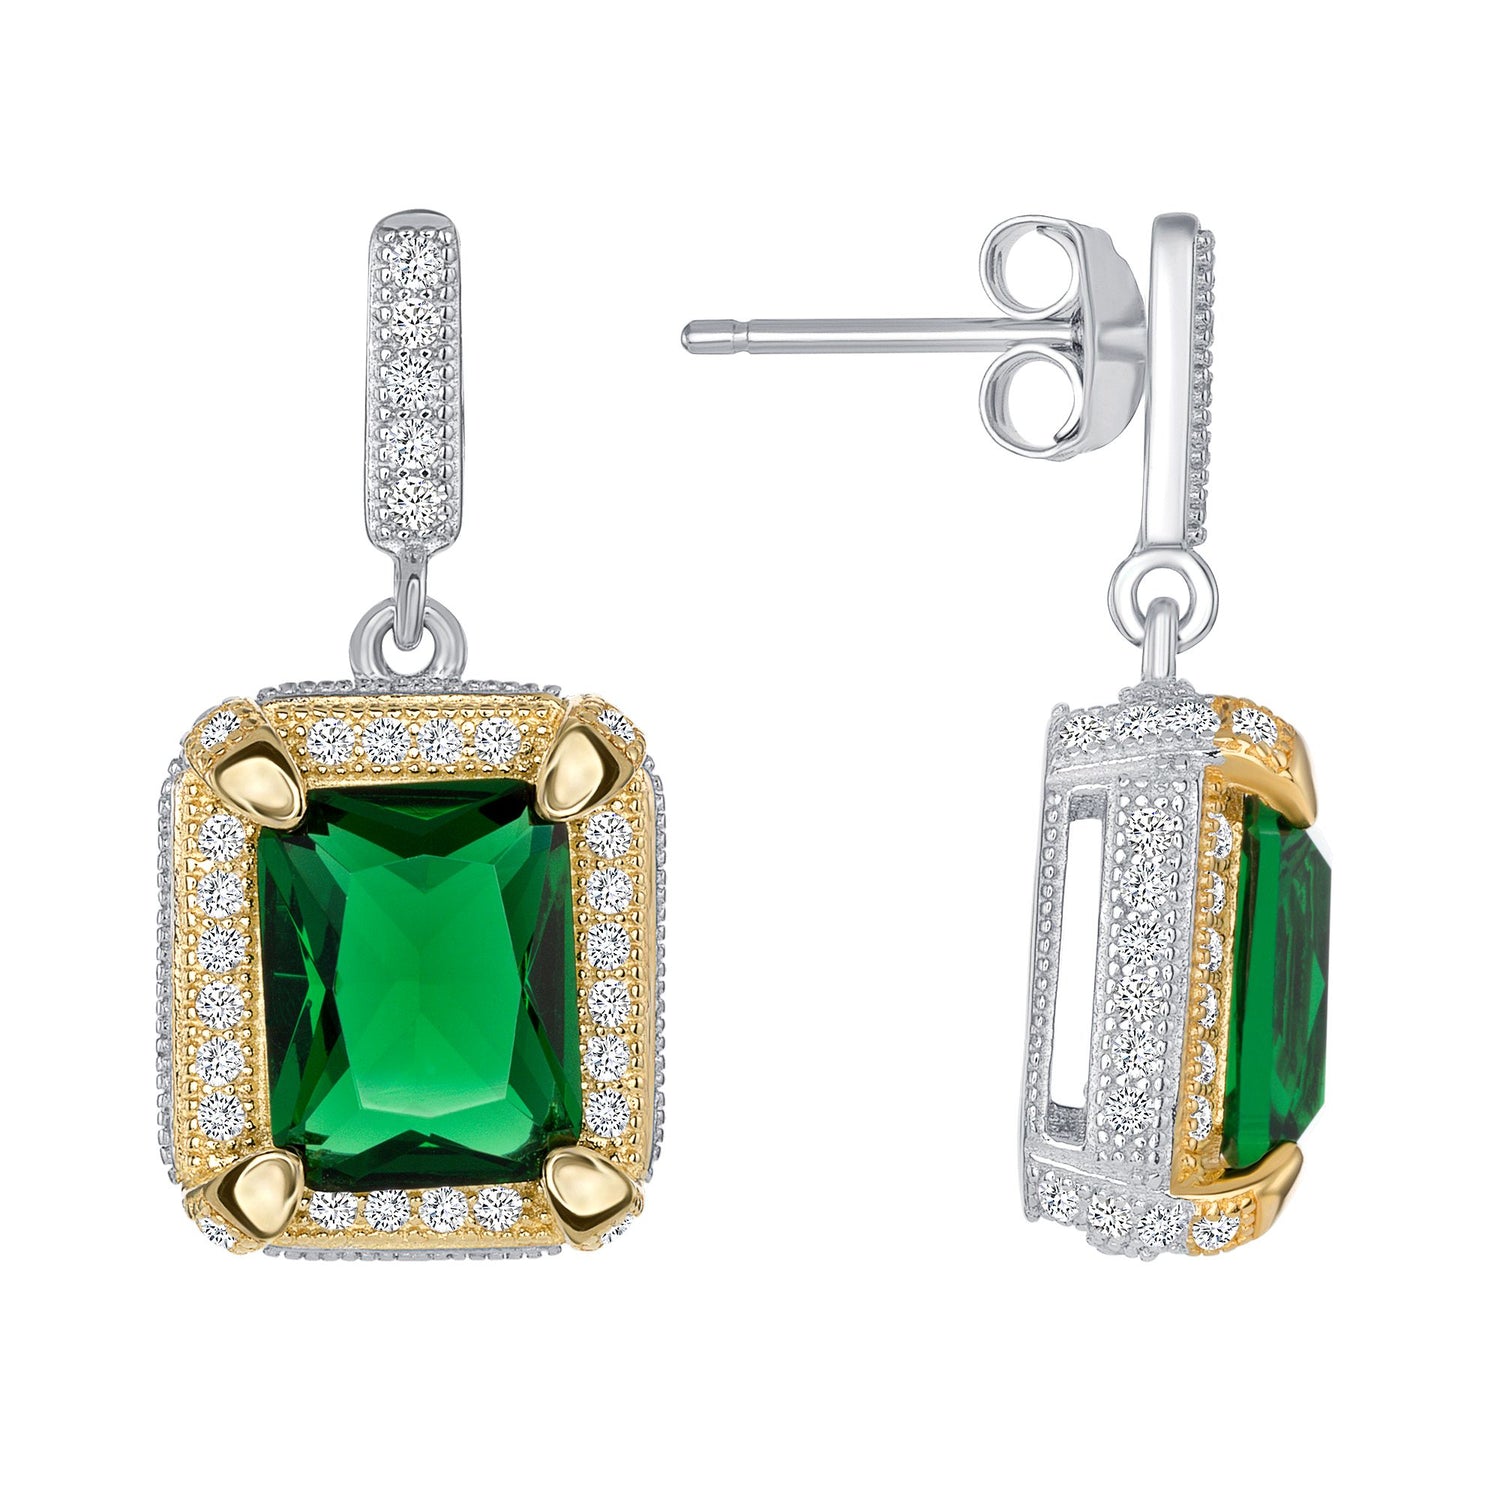 925 Sterling Silver Rectangular Cut Green CZ with Round Cut White CZ Halo &amp; Milgrain Border Two Tone Pendant &amp; Stud Earrings Jewelry Set